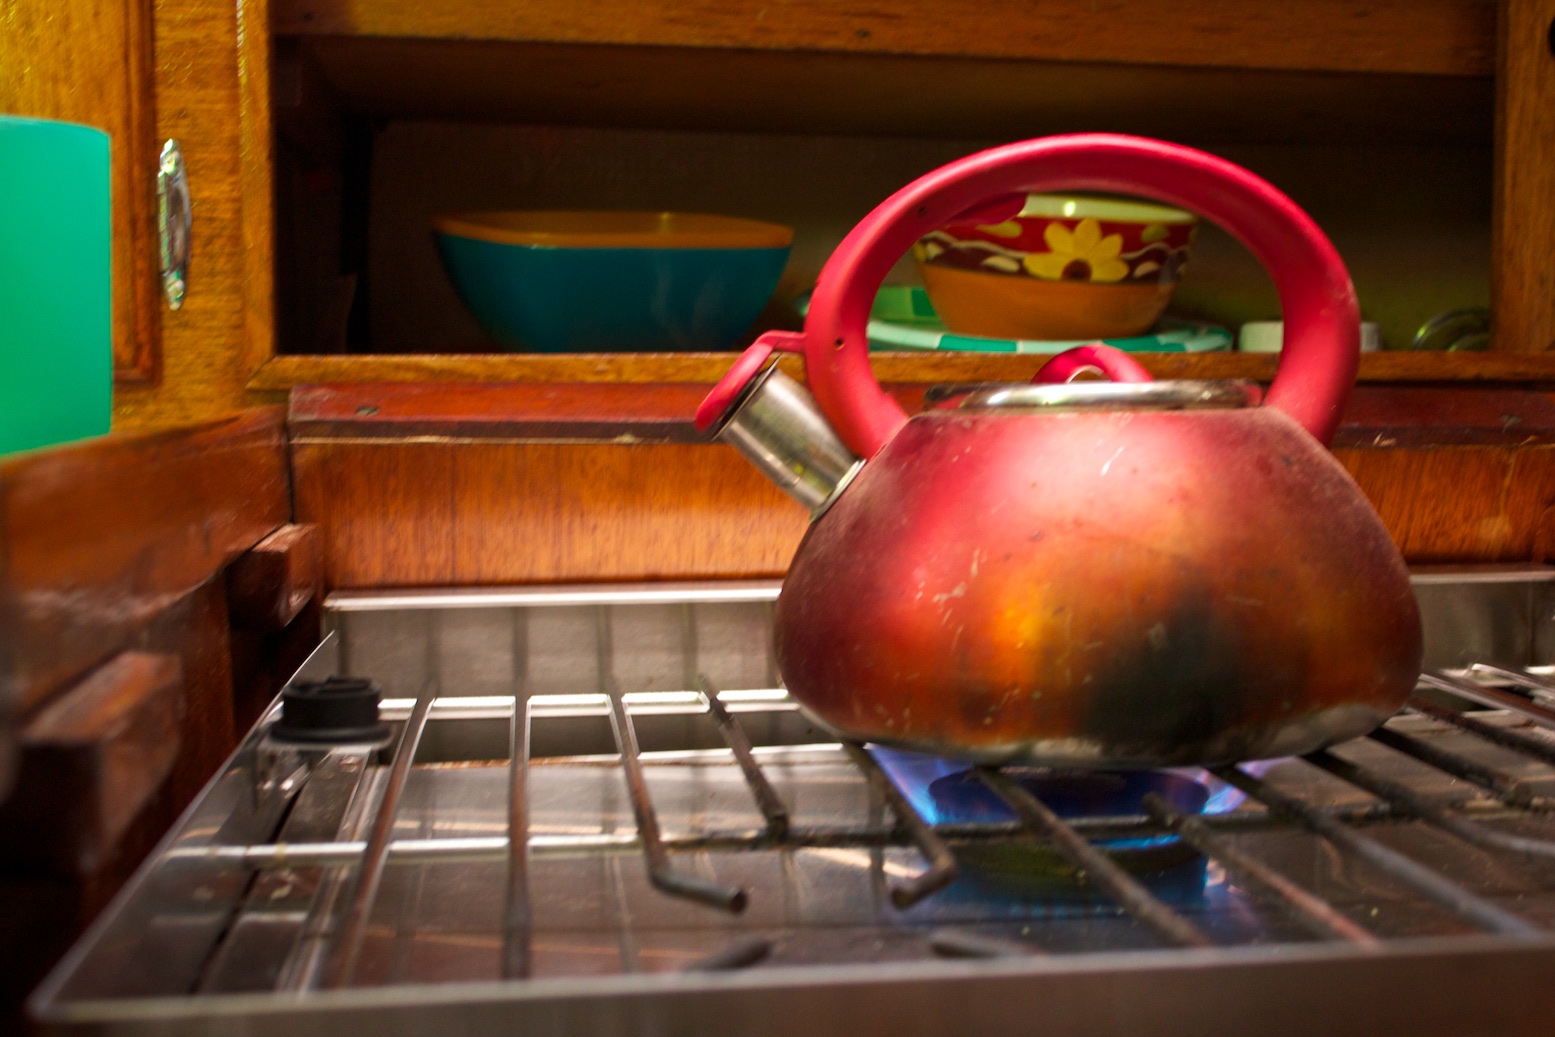 Tea Kettle from a Child's POV